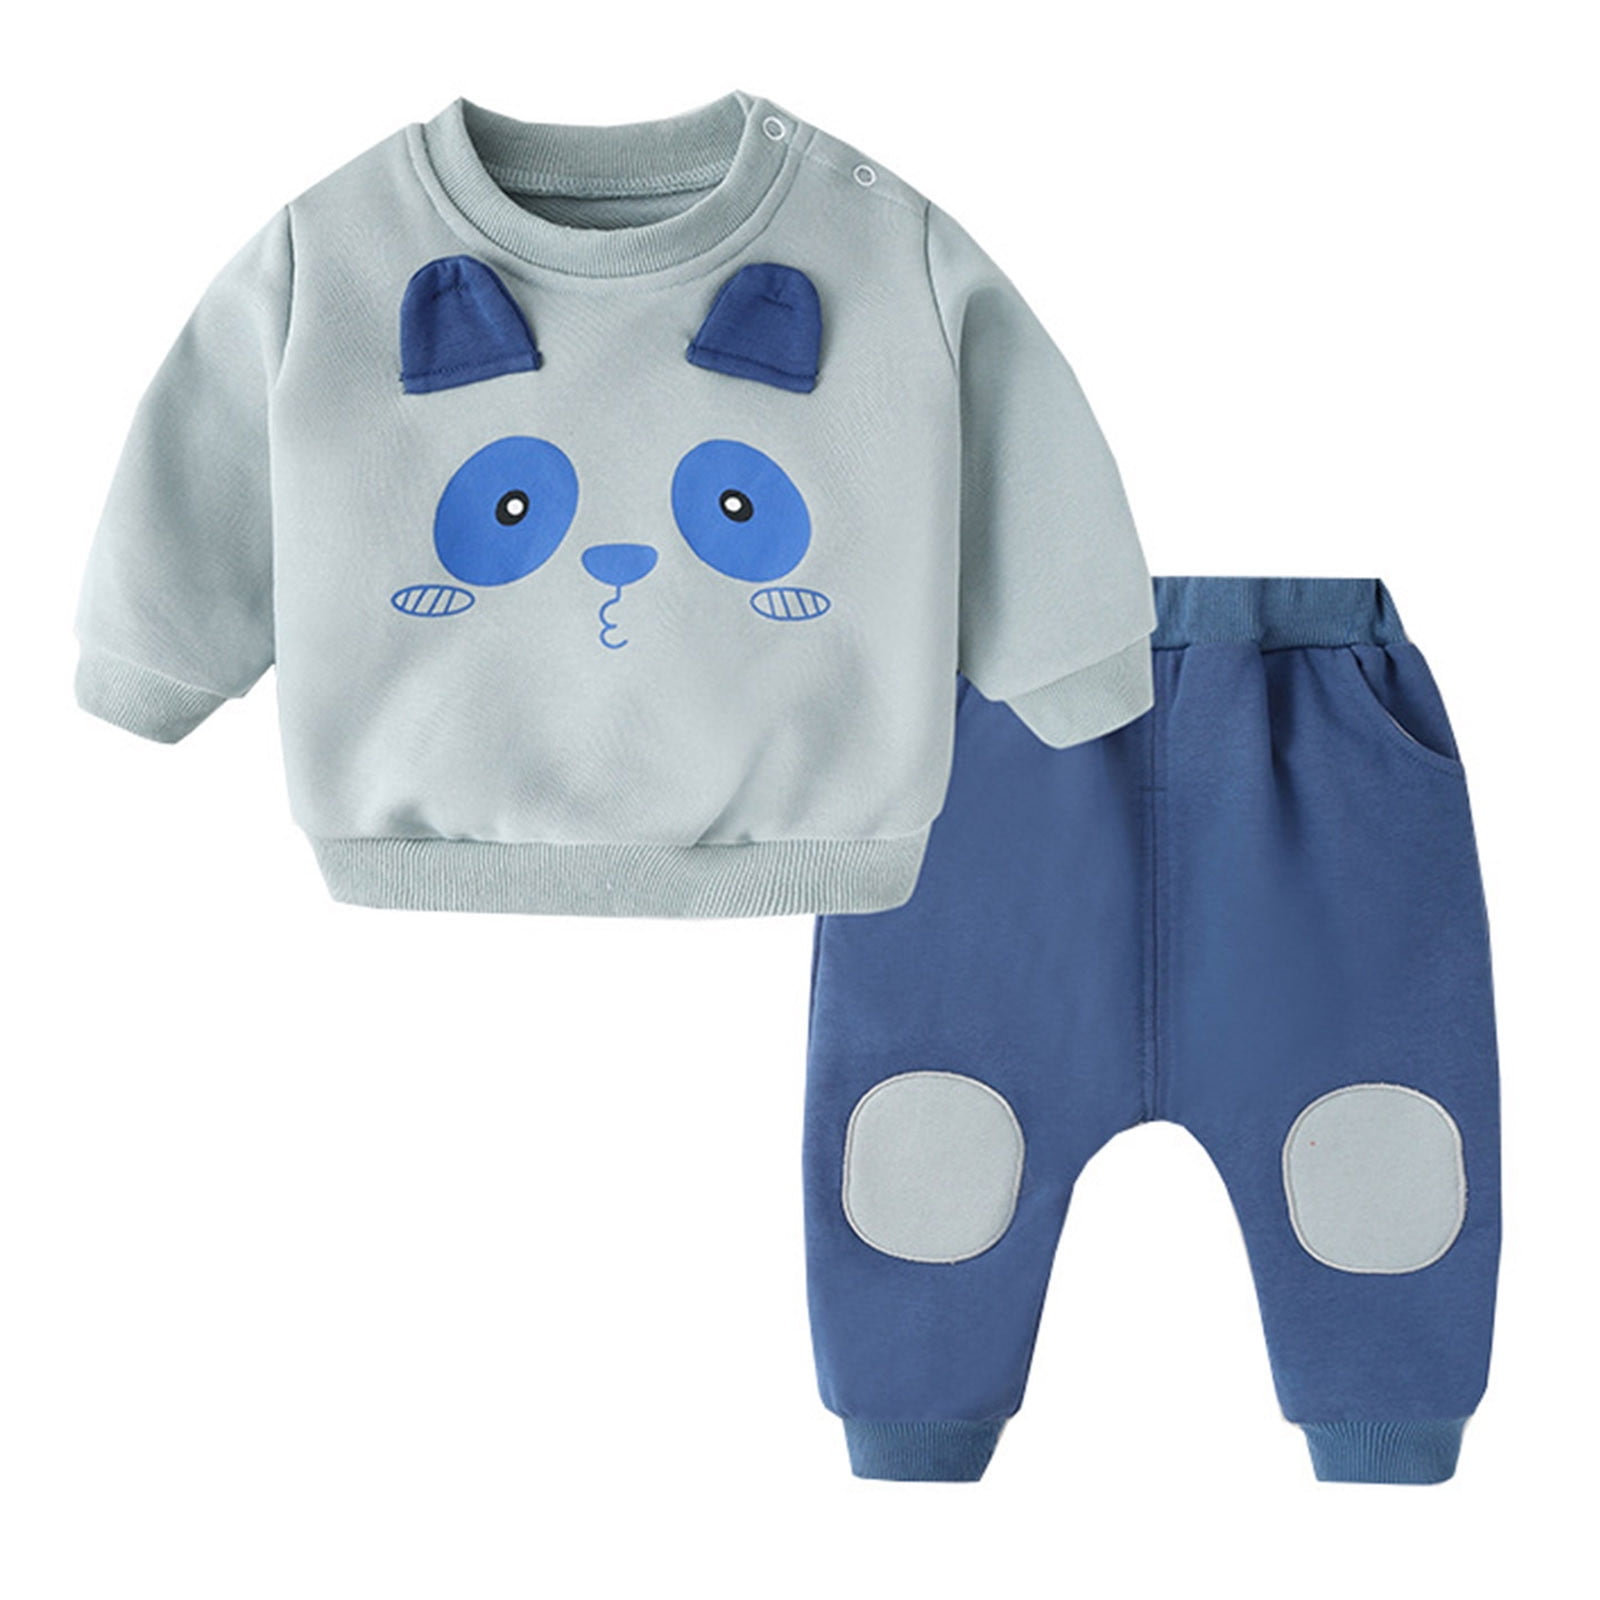  Infant Children Kids Toddler Baby Girls Boys Long Sleeve Cute  Animals Hoodie Sweatshirt Pullover Tops Cotton Trousers Pants Outfit Set  2PCS Clothes Dinosaur Shirts for Boys (Light Blue, 2-3 Years) 